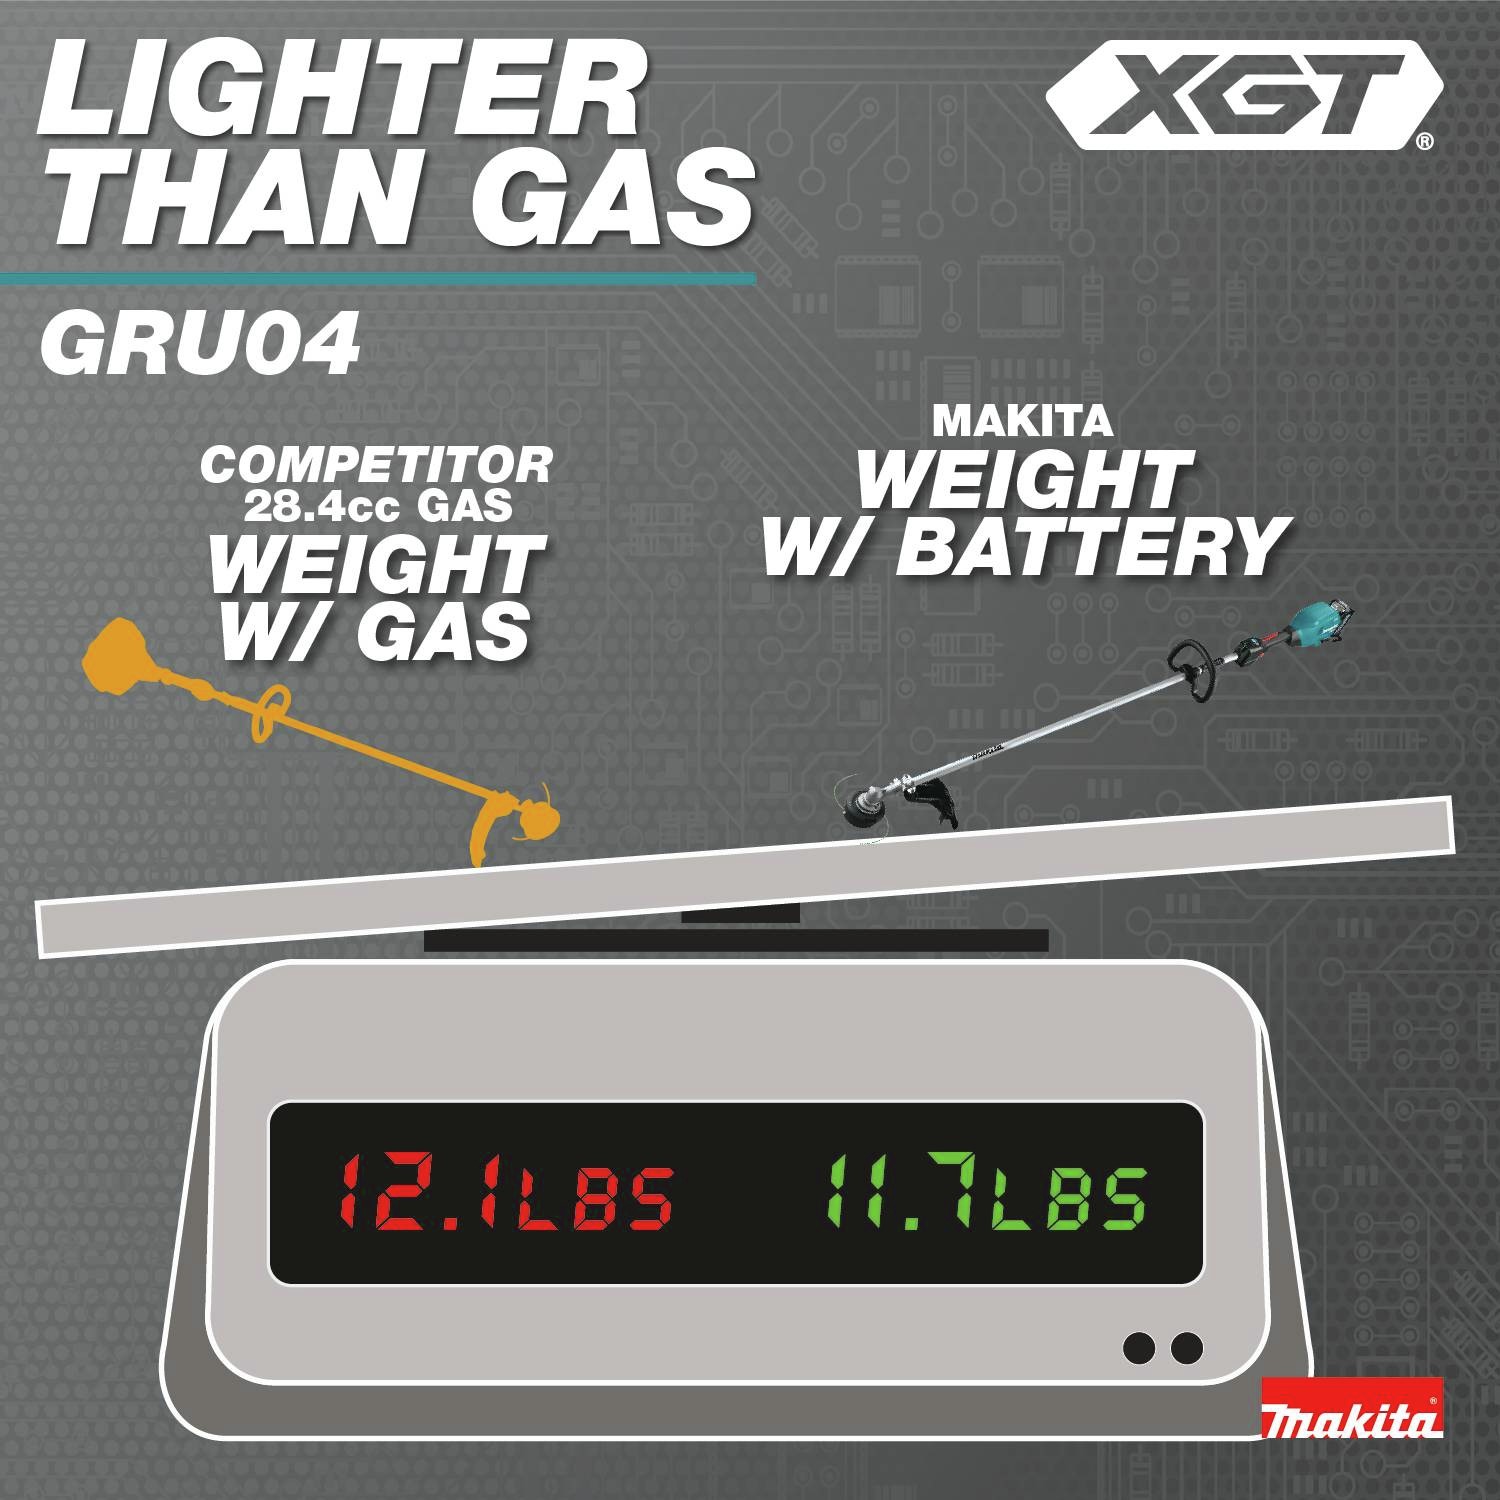 Lighter than Gas: Competitor 28.4cc weight with gas 12.1 lbs. vs Makita weight with battery 11.7 lbs.